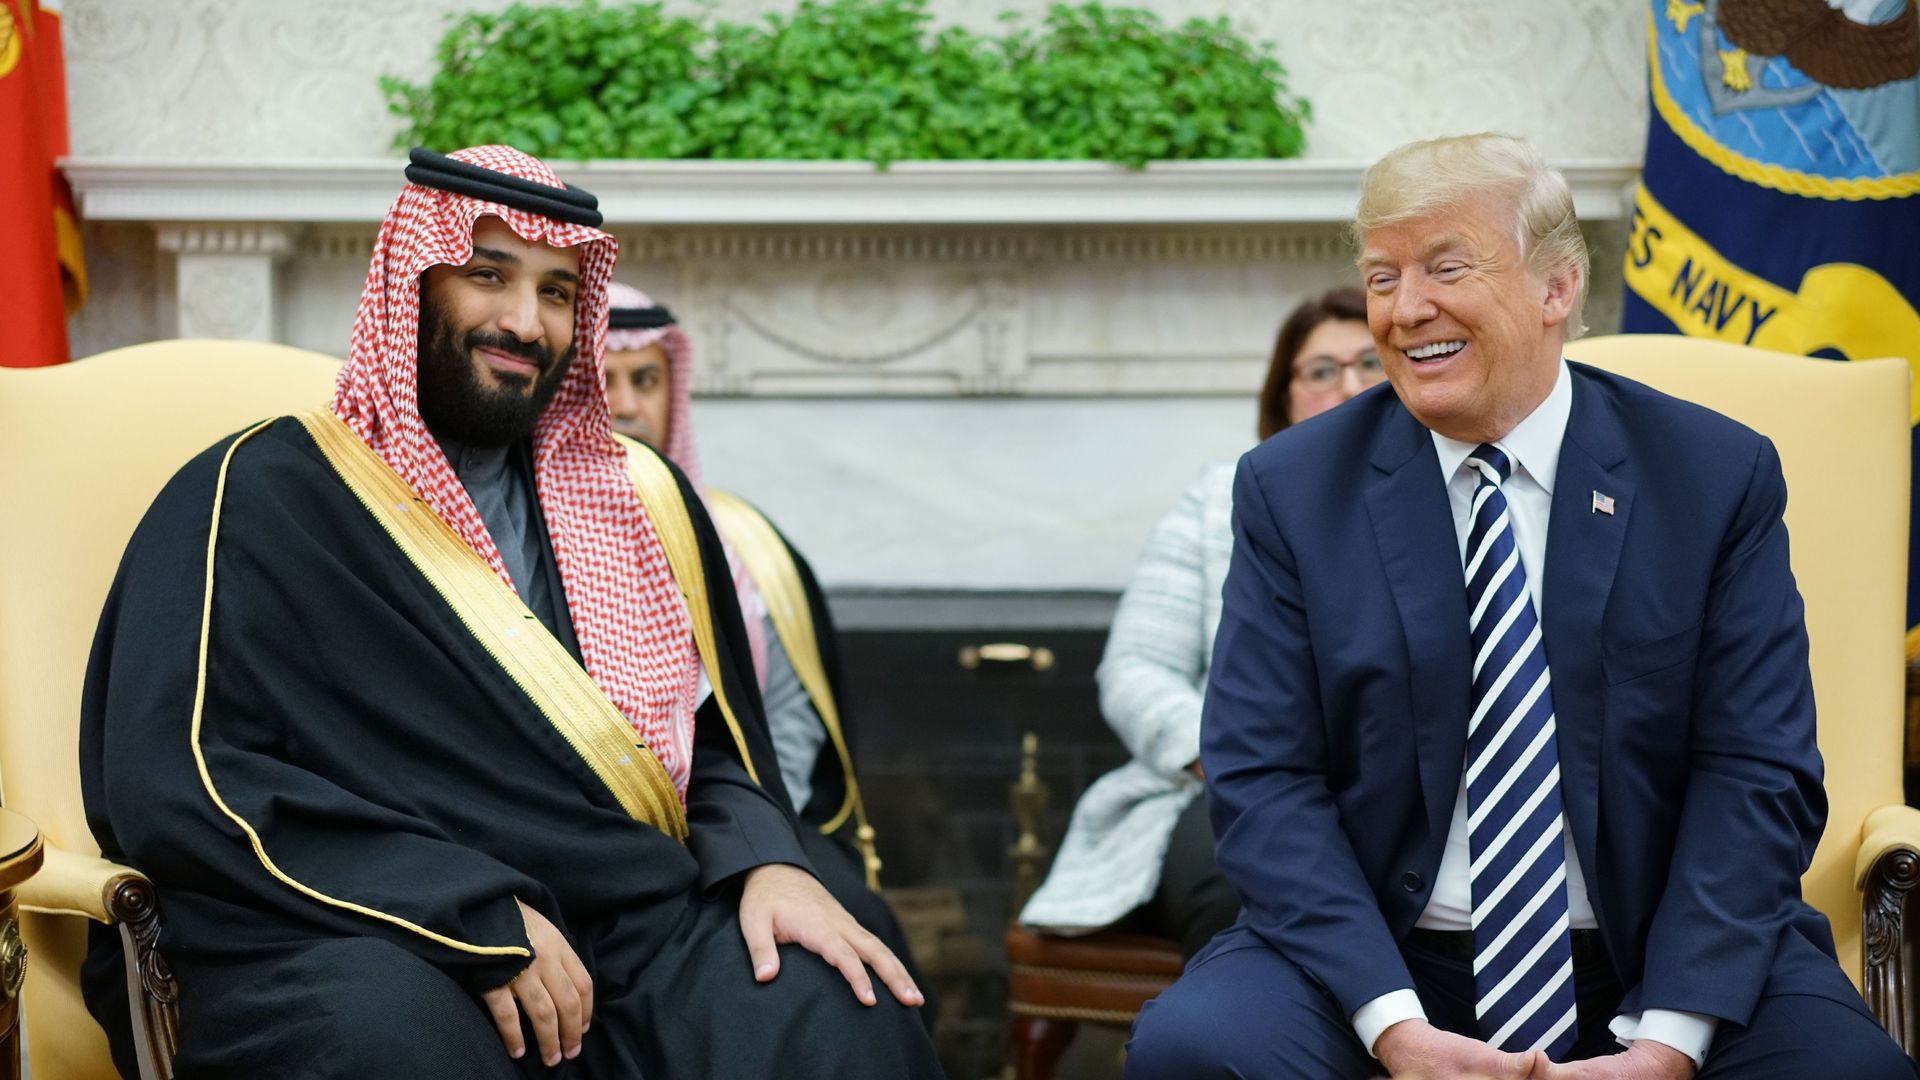 President Trump and Saudi Crown Prince Mohammed bin Salman seated in the Oval Office